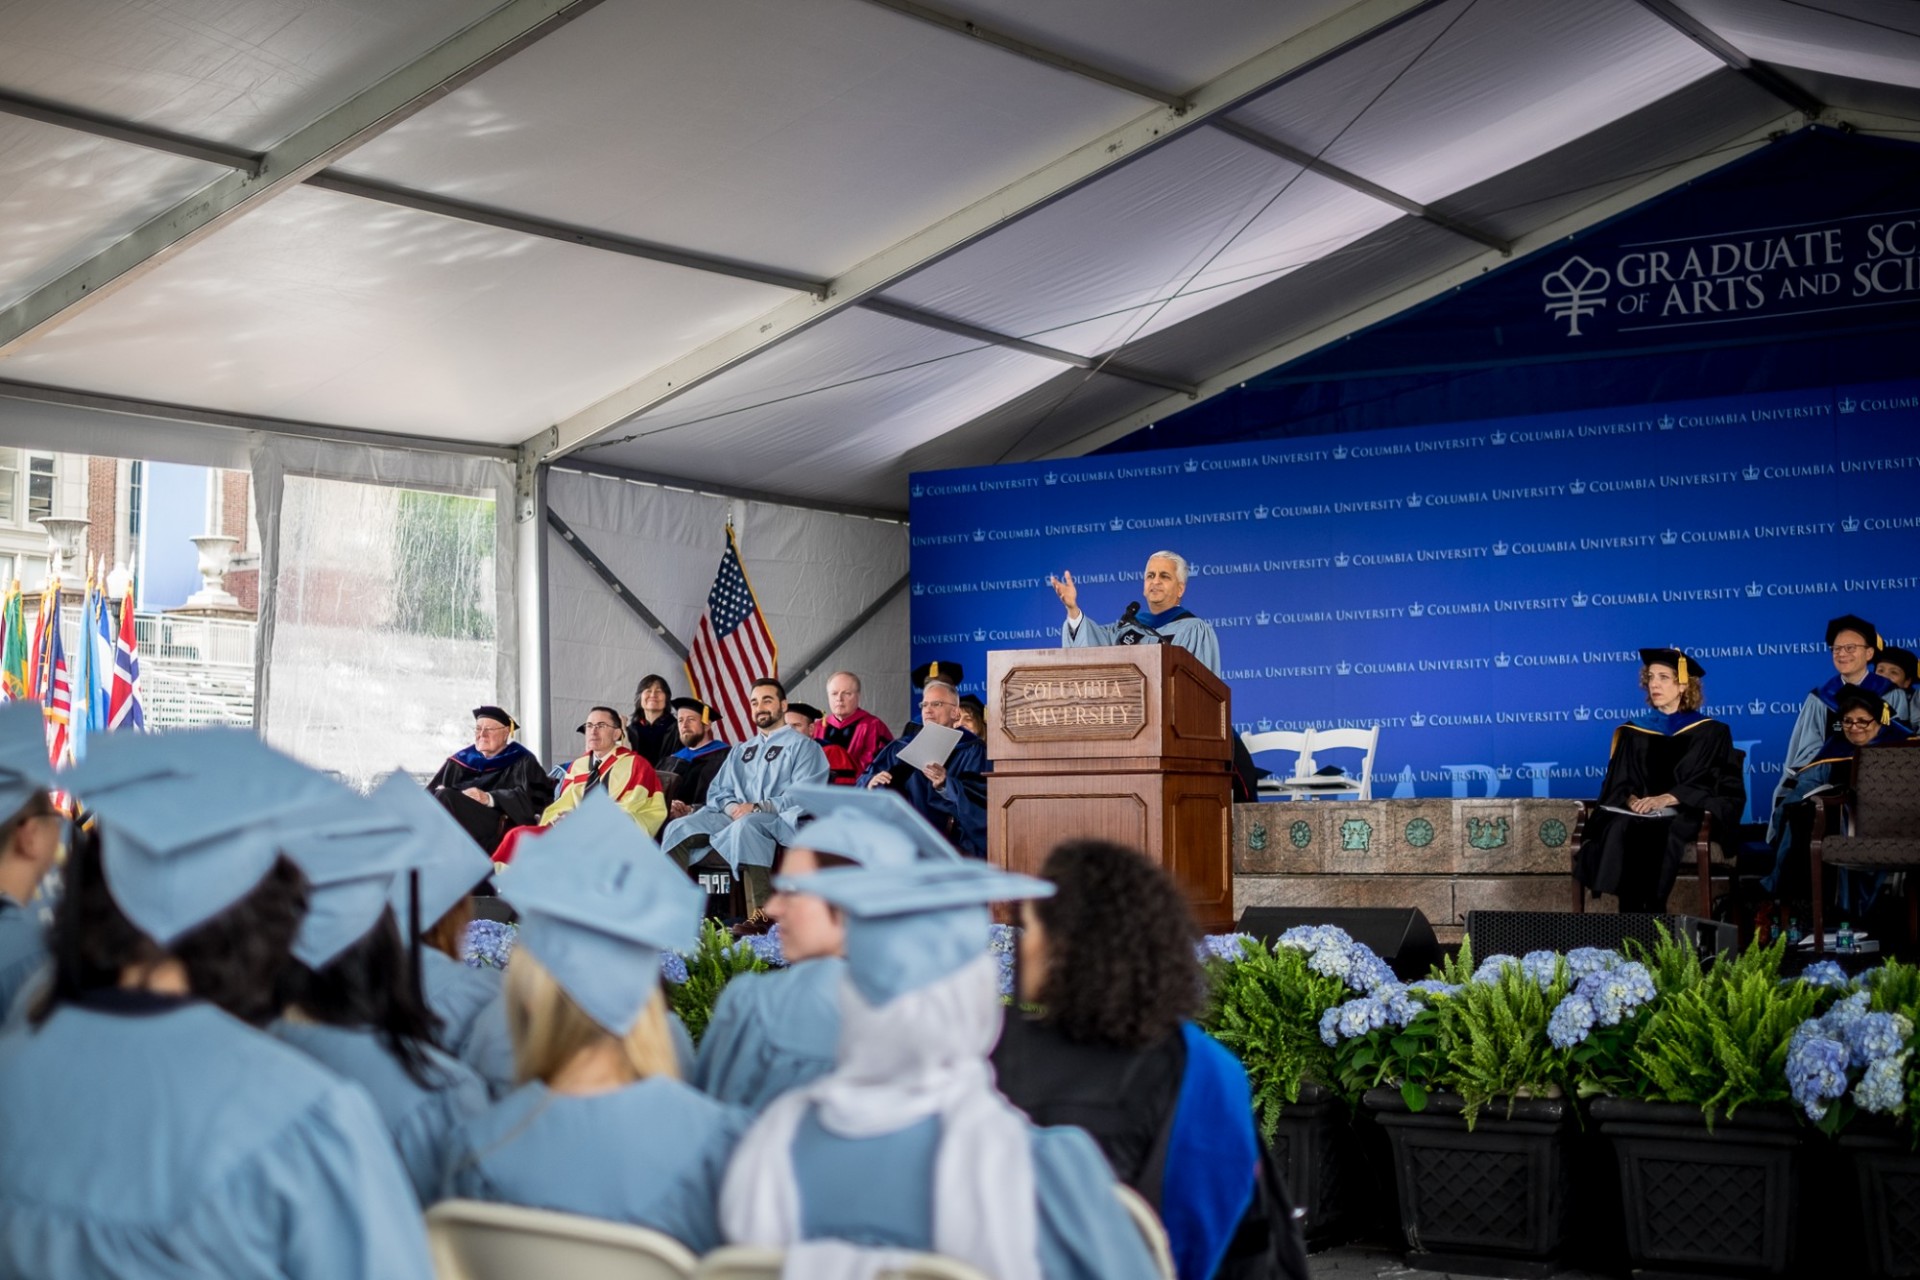 Sunil Gulati, senior lecturer in the Department of Economics and president of the US Soccer Federation, delivers the keynote address for MA graduates.